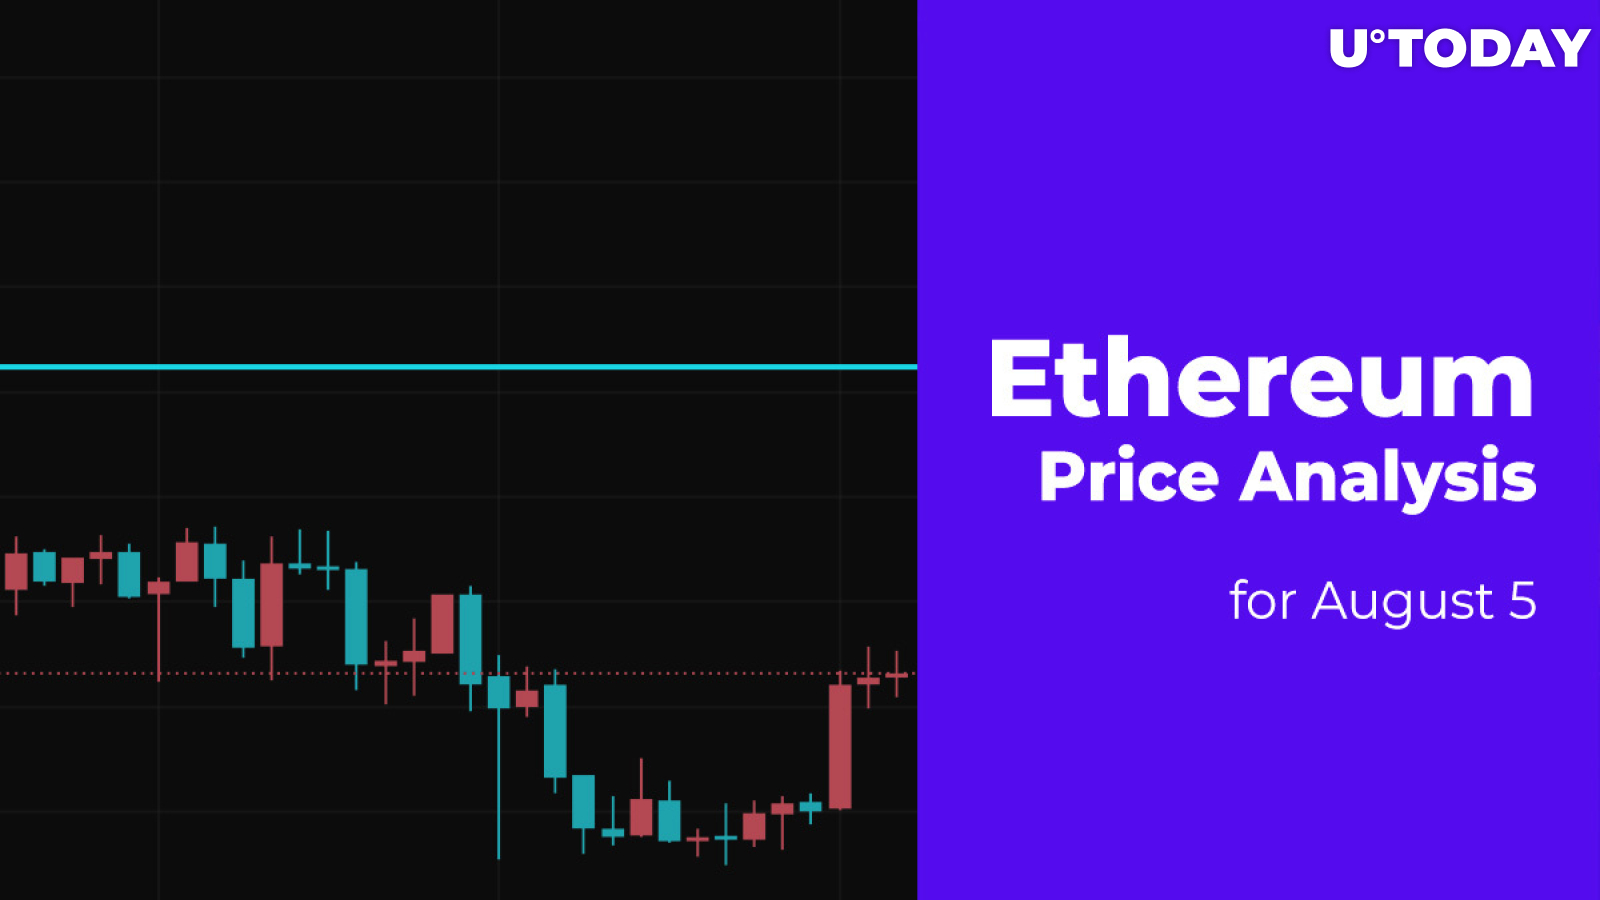 Ethereum (ETH) Price Analysis for August 5